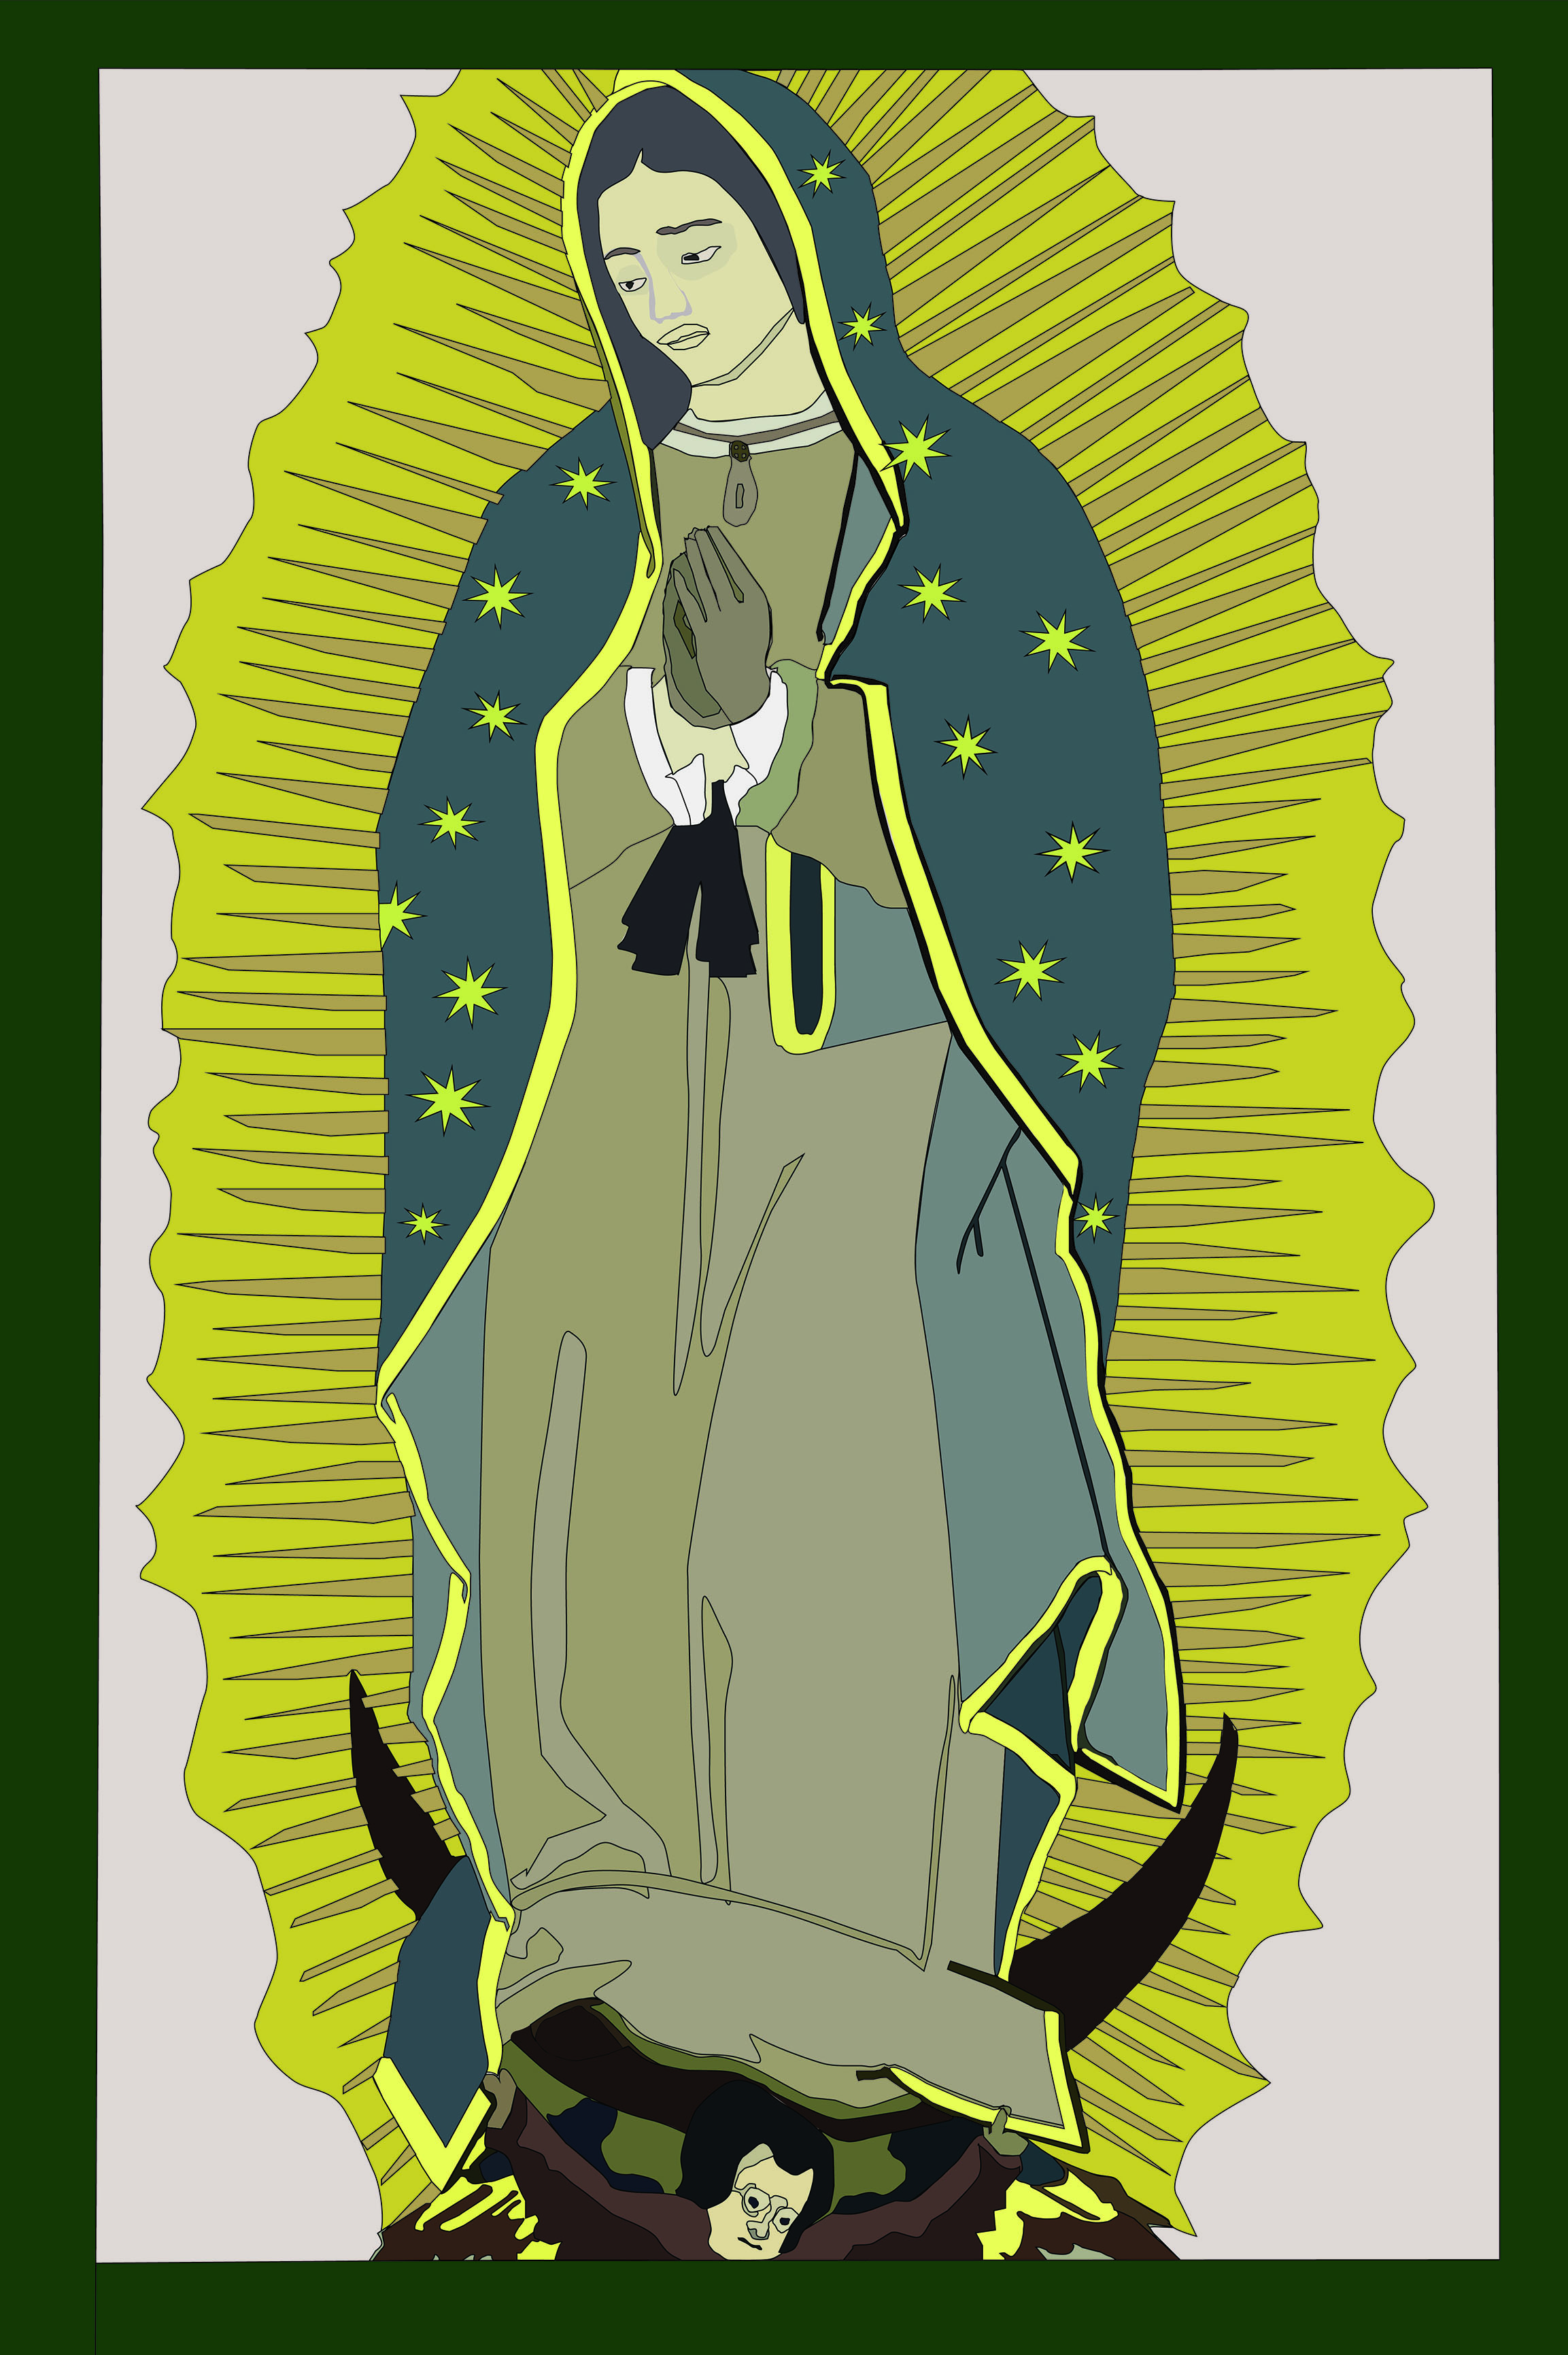 Our Lady of Guadalupe Illustration - Bryan Hewing (2018)